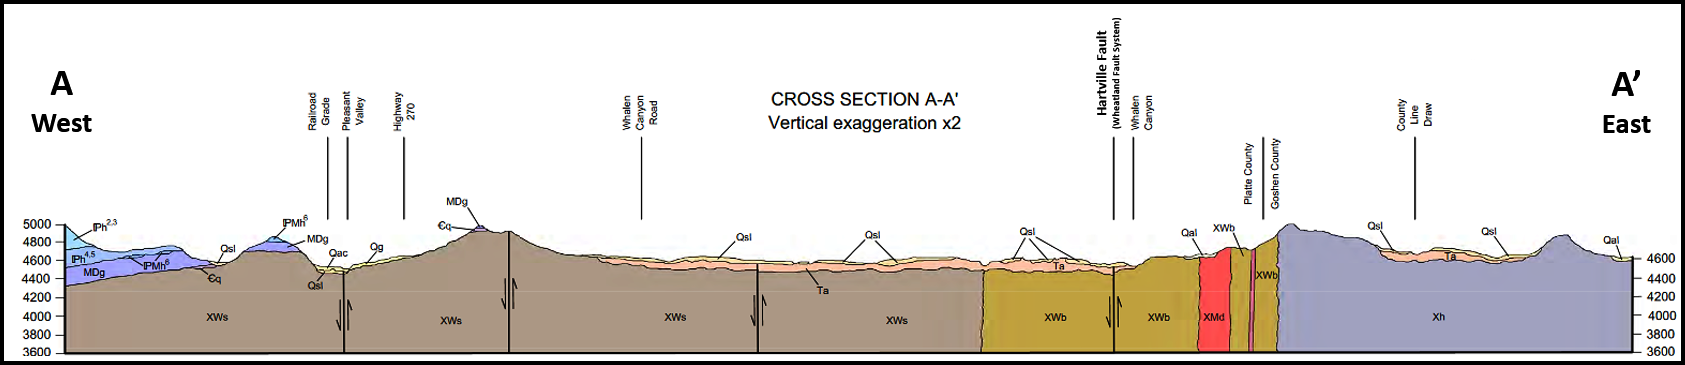 Geologic structural cross section through Hartville Uplift, Wyoming